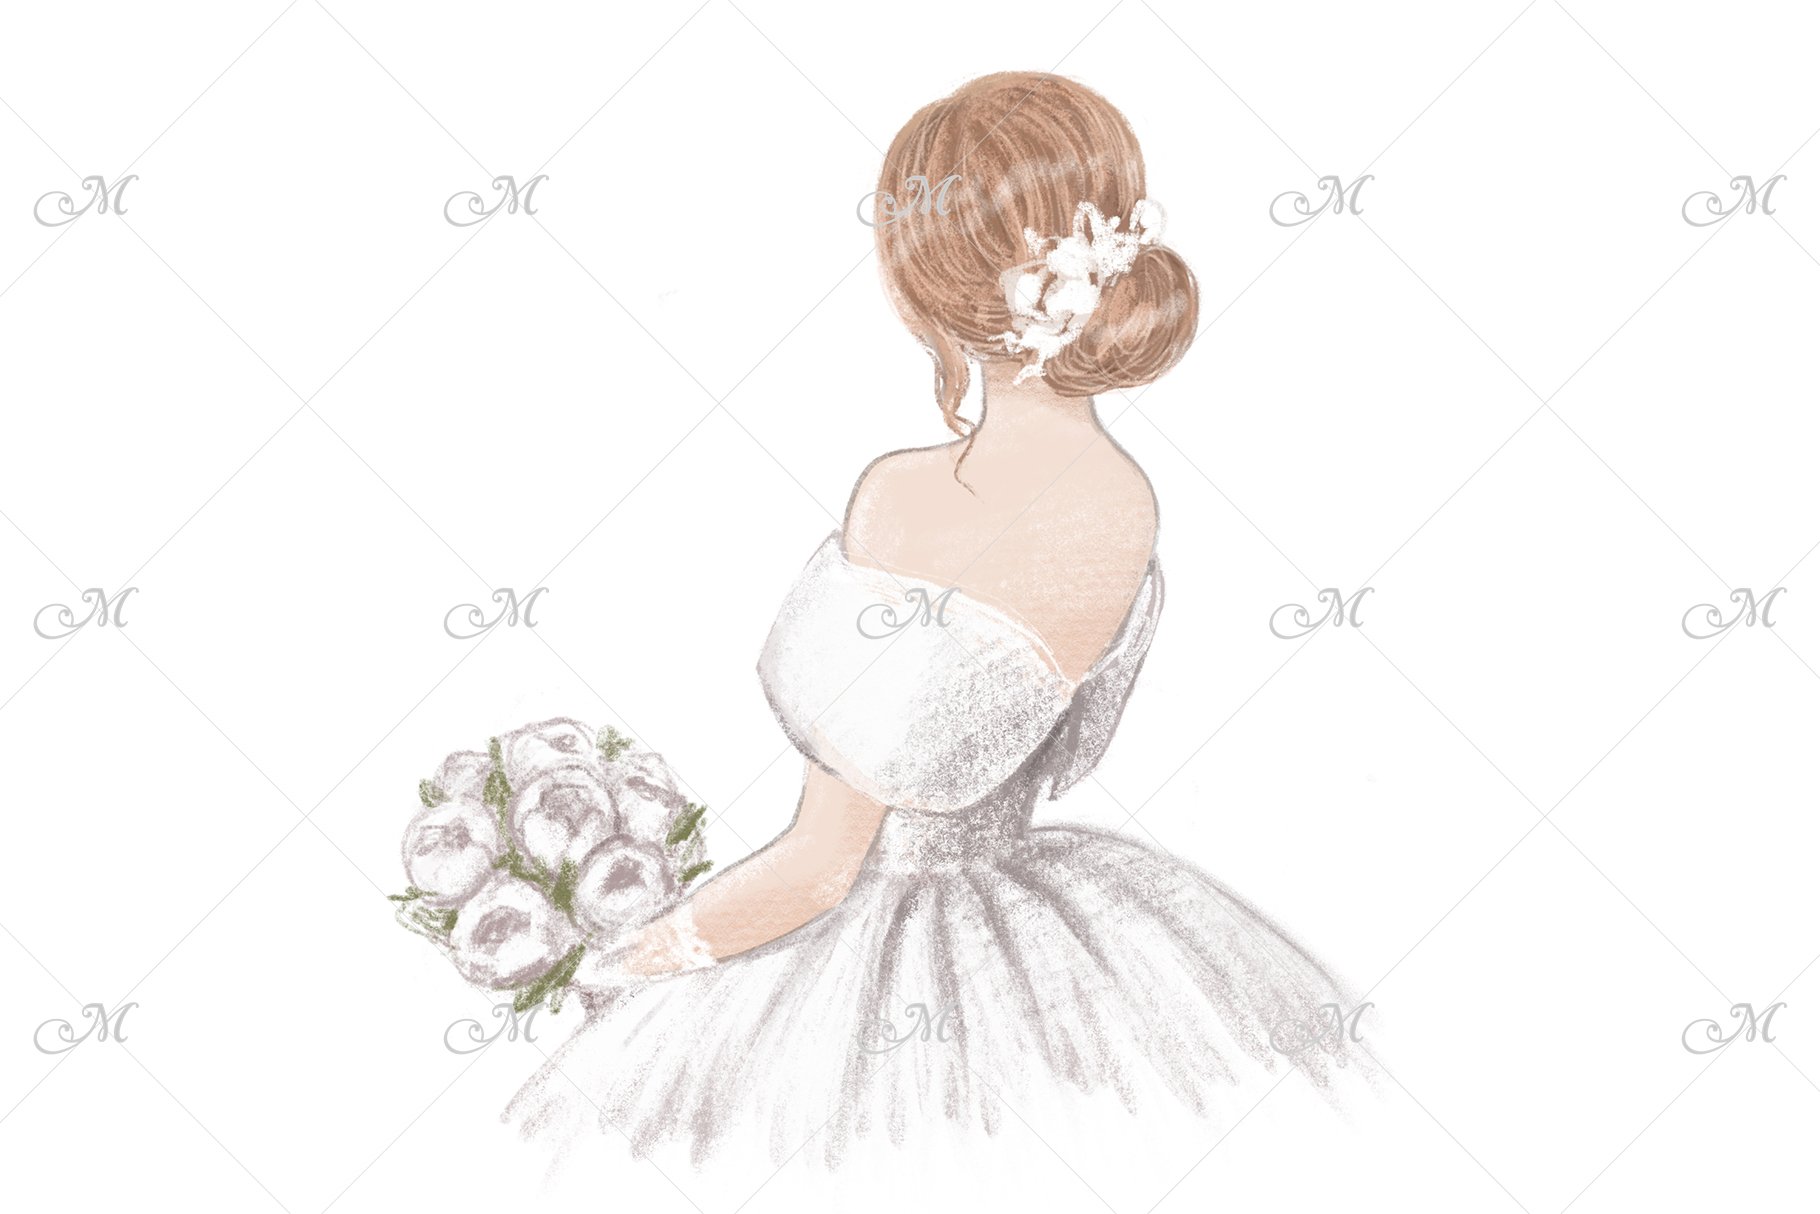 Bride with Bouquet Hand Drawn cover image.